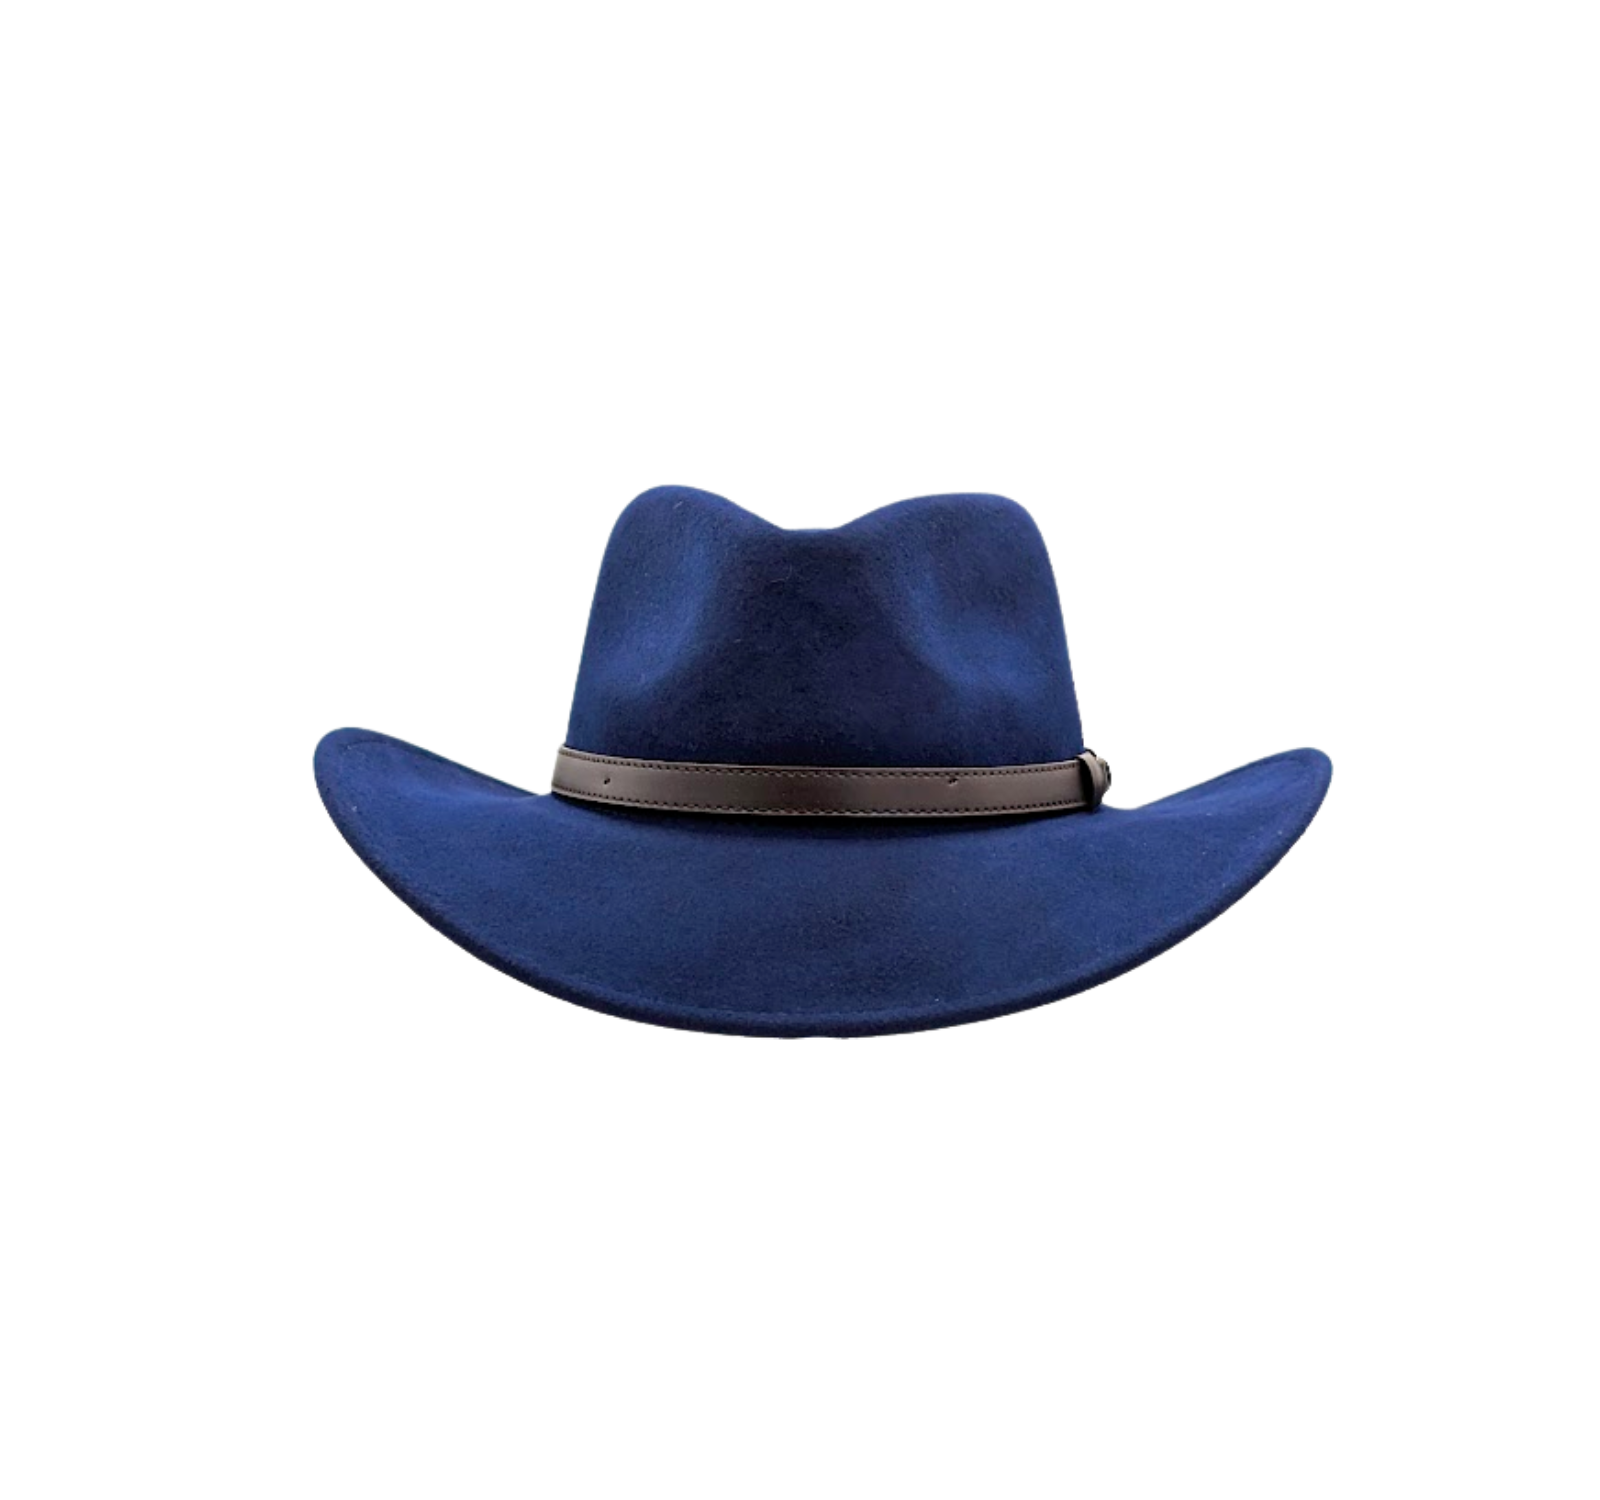 Cowboy Hat by Stansmore